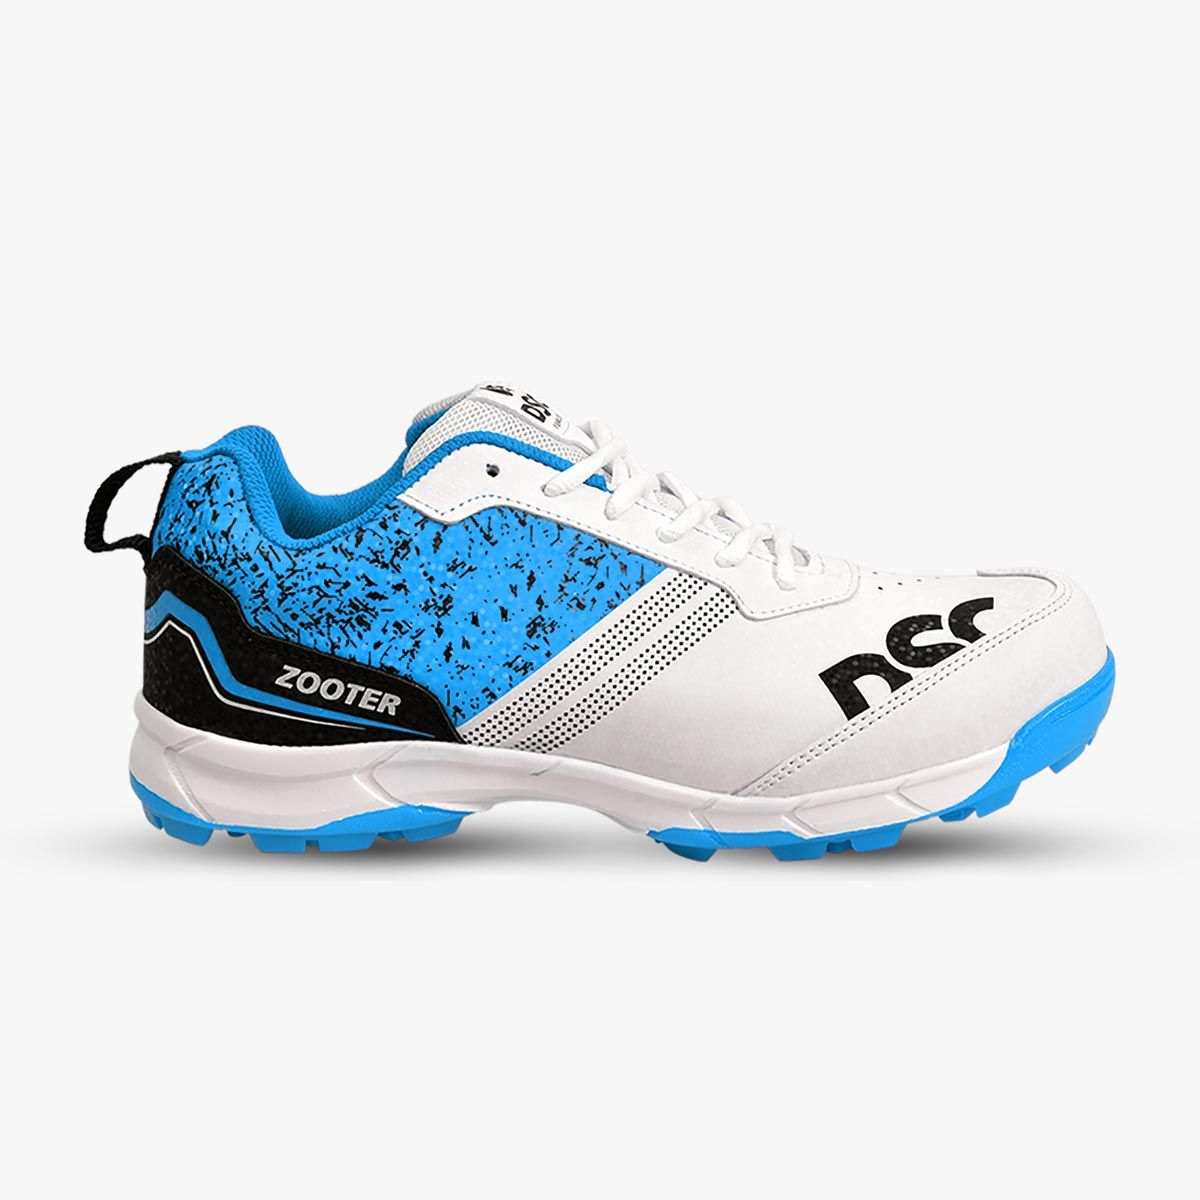 DSC Zooter Junior Cricket Shoes Blue and White